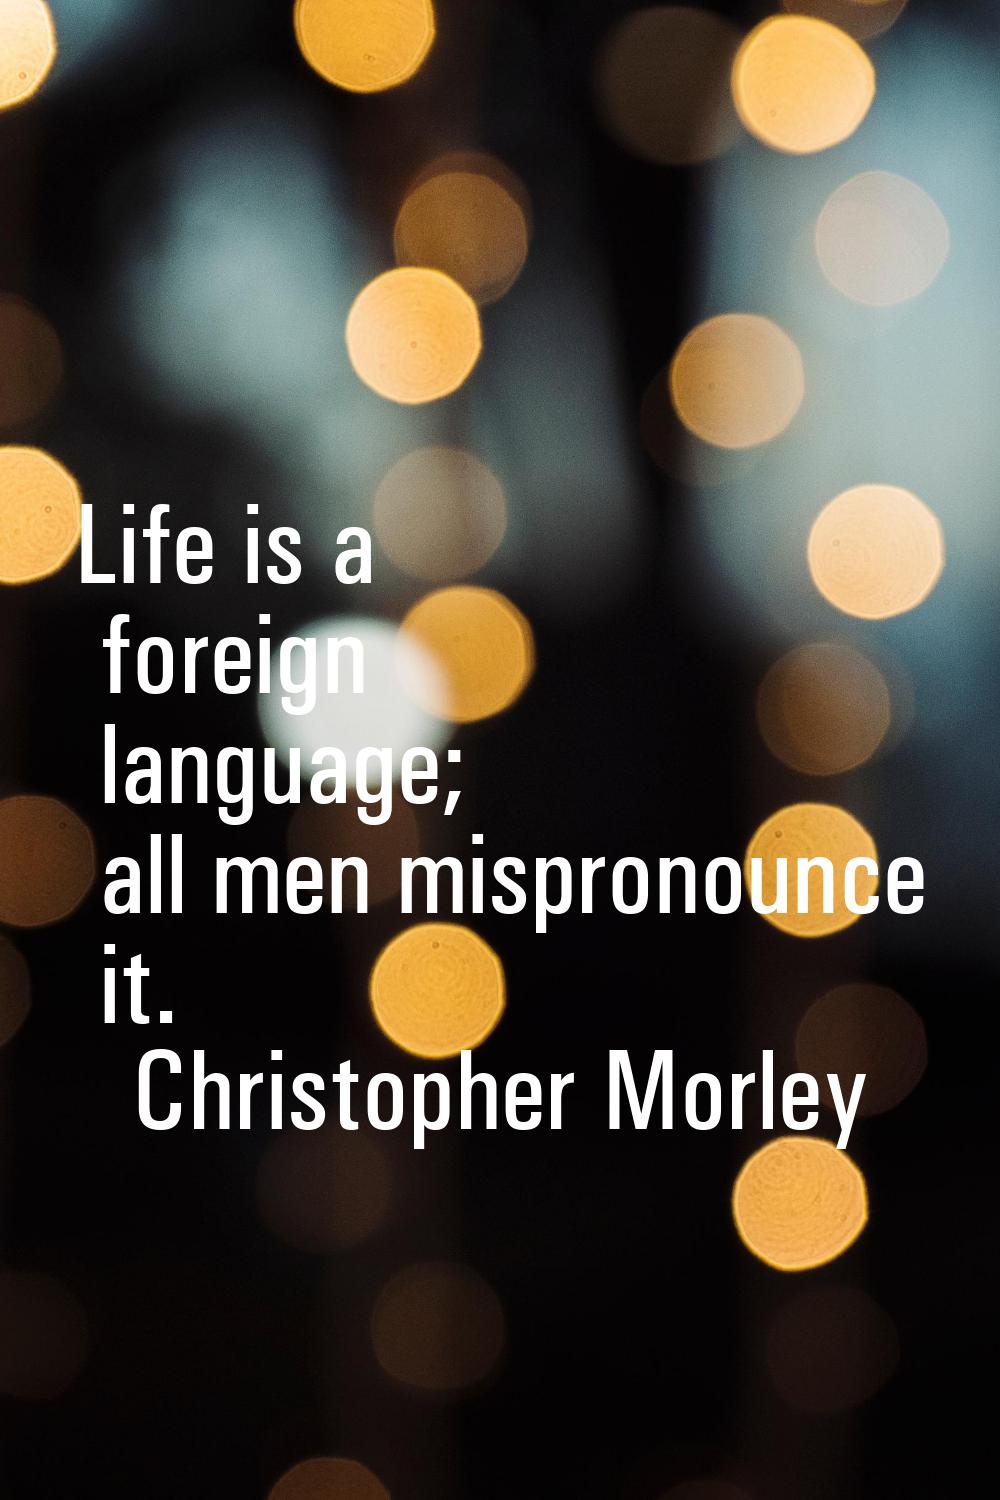 Life is a foreign language; all men mispronounce it.